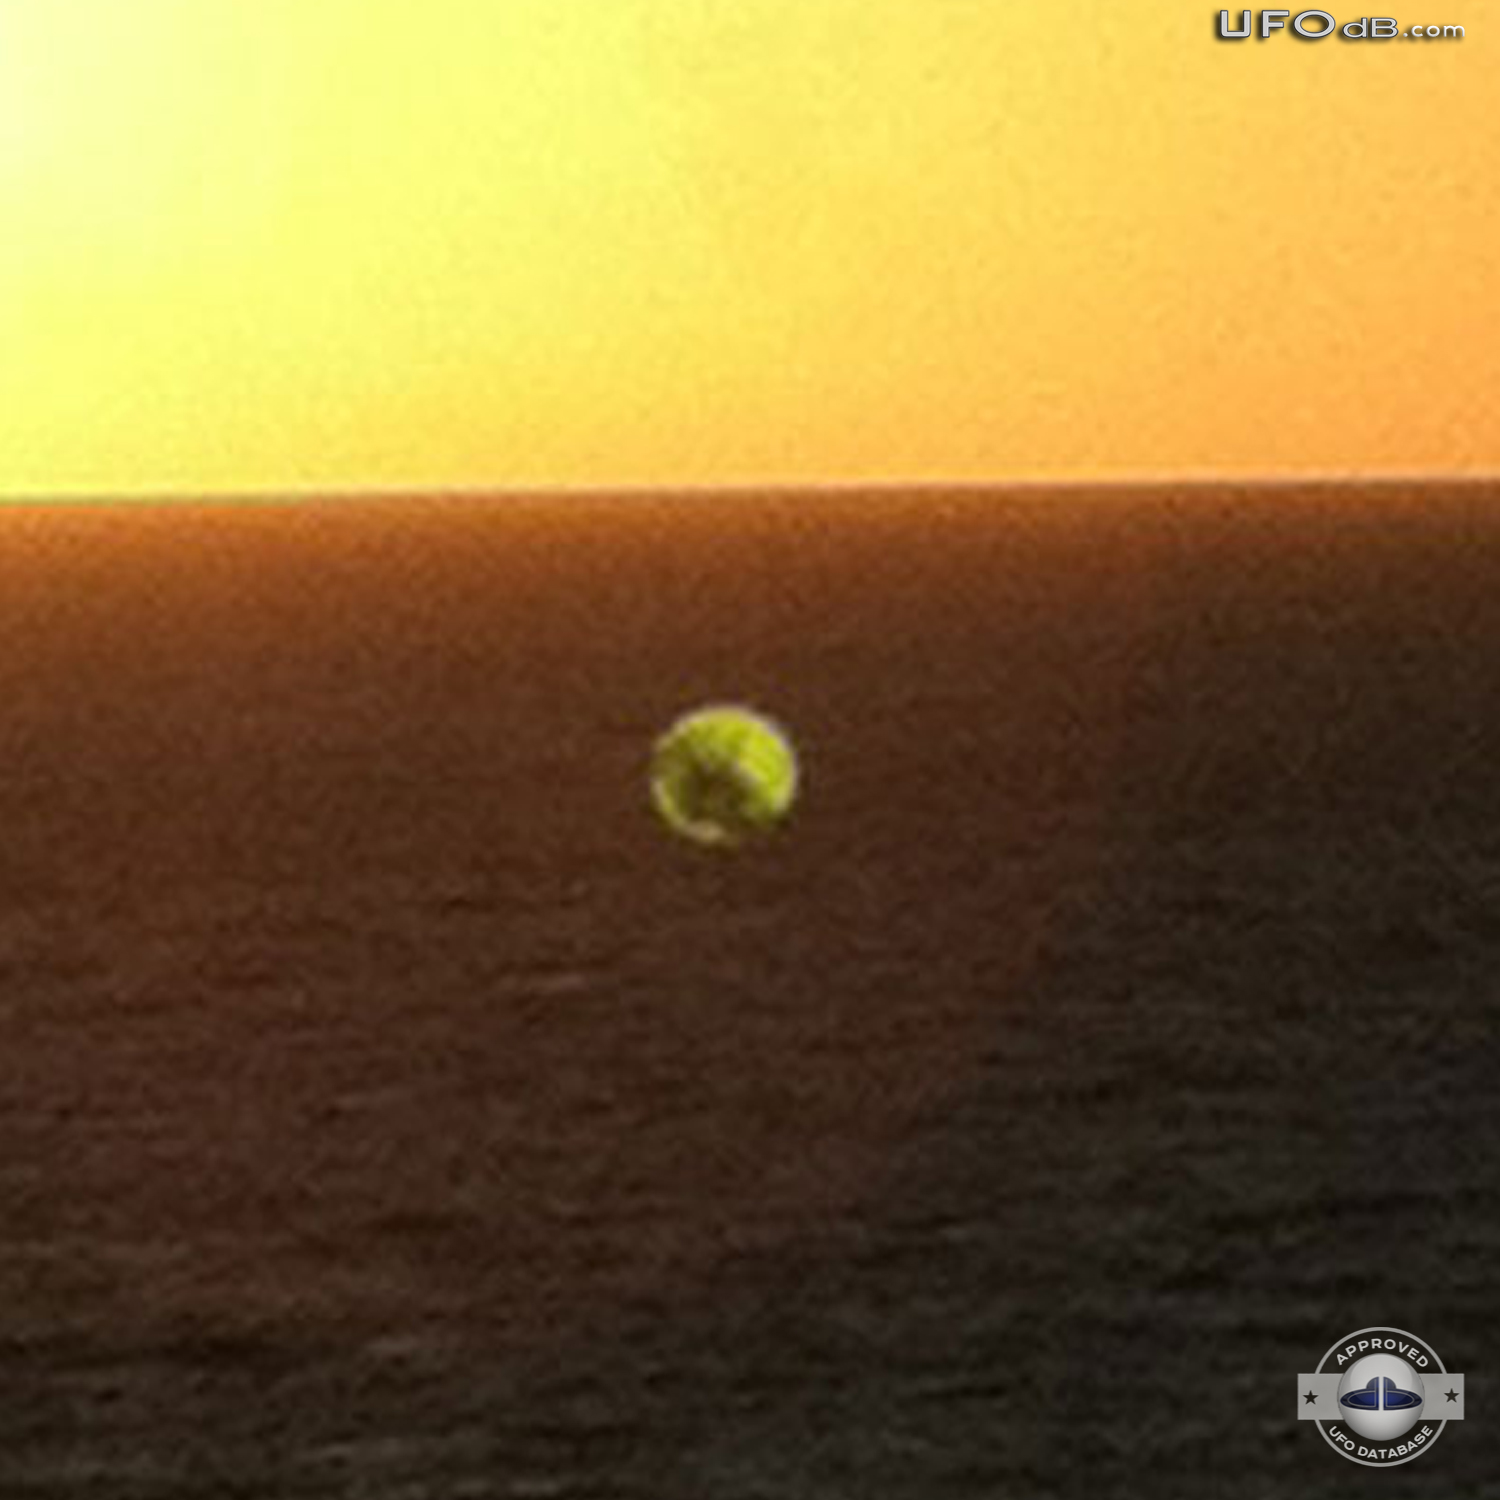 Green Sphere UFO caught on picture over the ocean | Miami Beach | 2011 UFO Picture #356-3